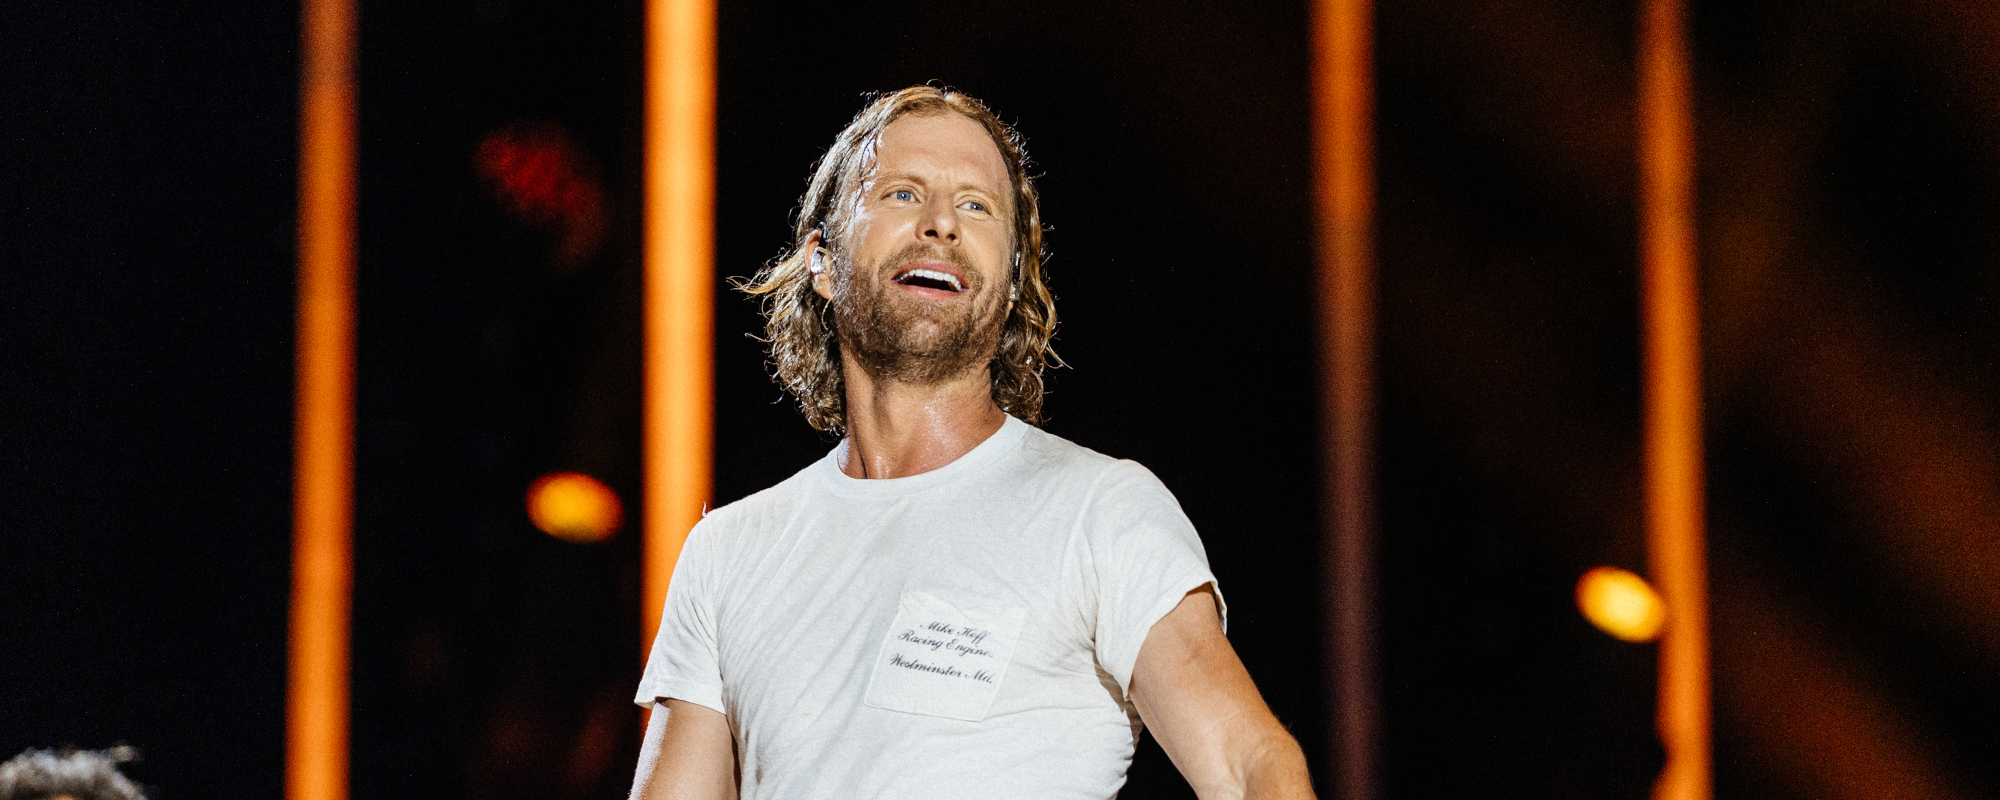 Dierks Bentley Talks Hosting CMA Fest TV Special with Elle King and Lainey Wilson—“It’s a Dream Come True”